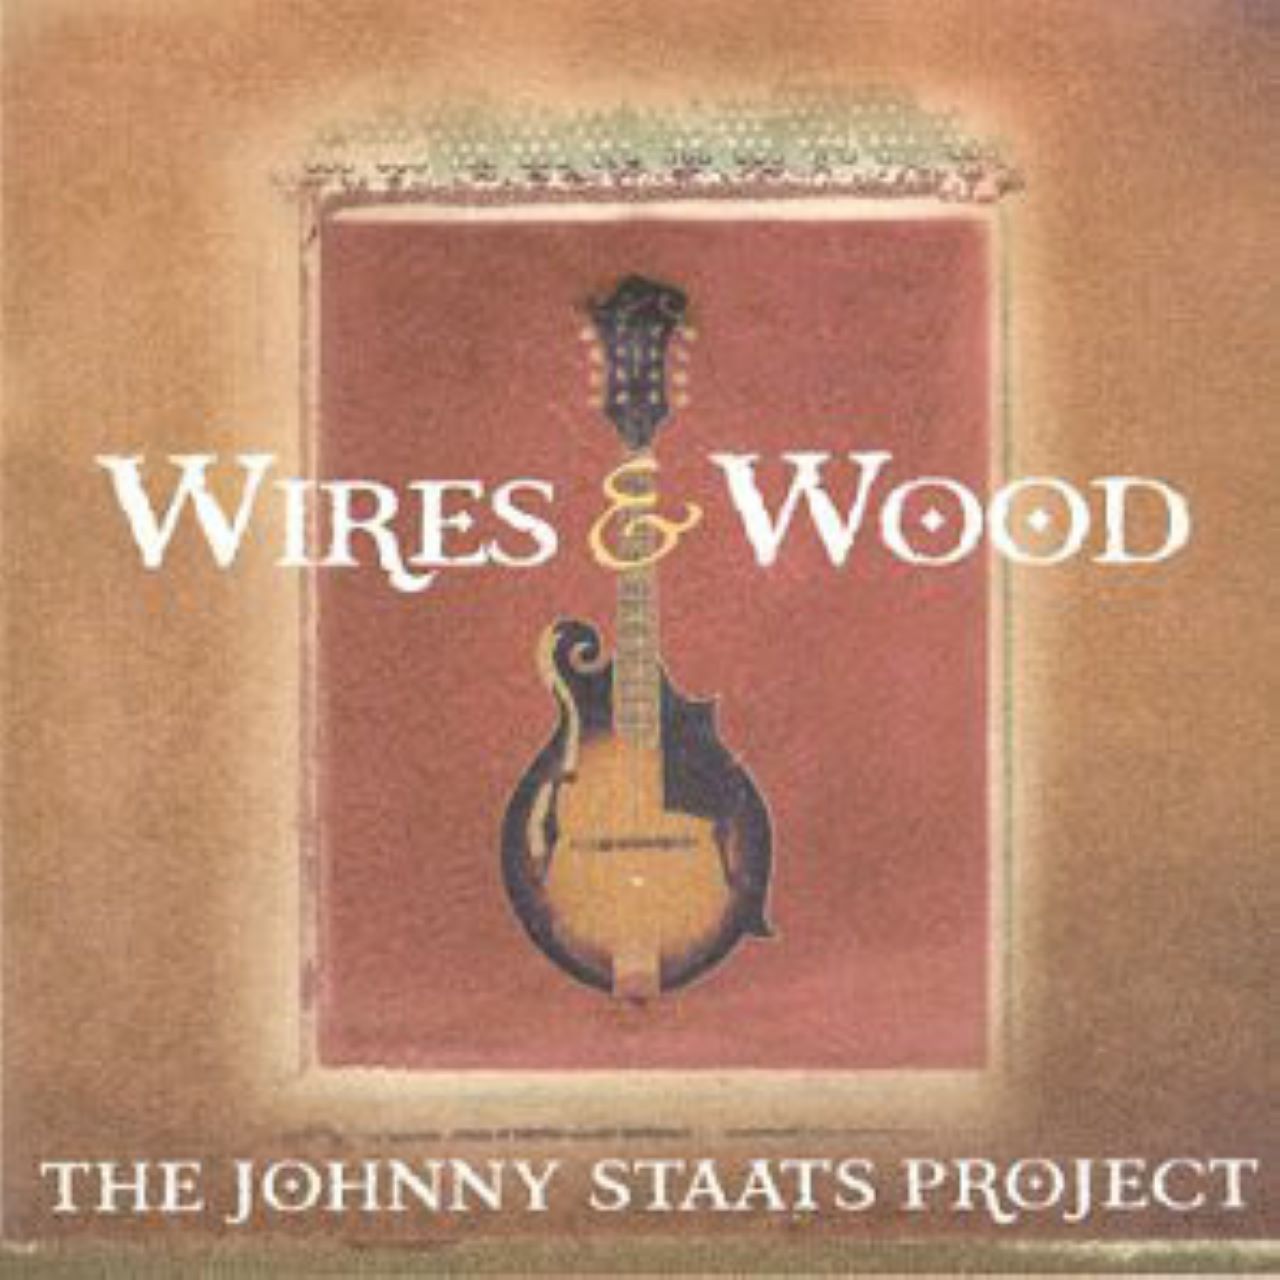 Johnny Staats - The Johnny Staats Project - Wires And Wood cover album